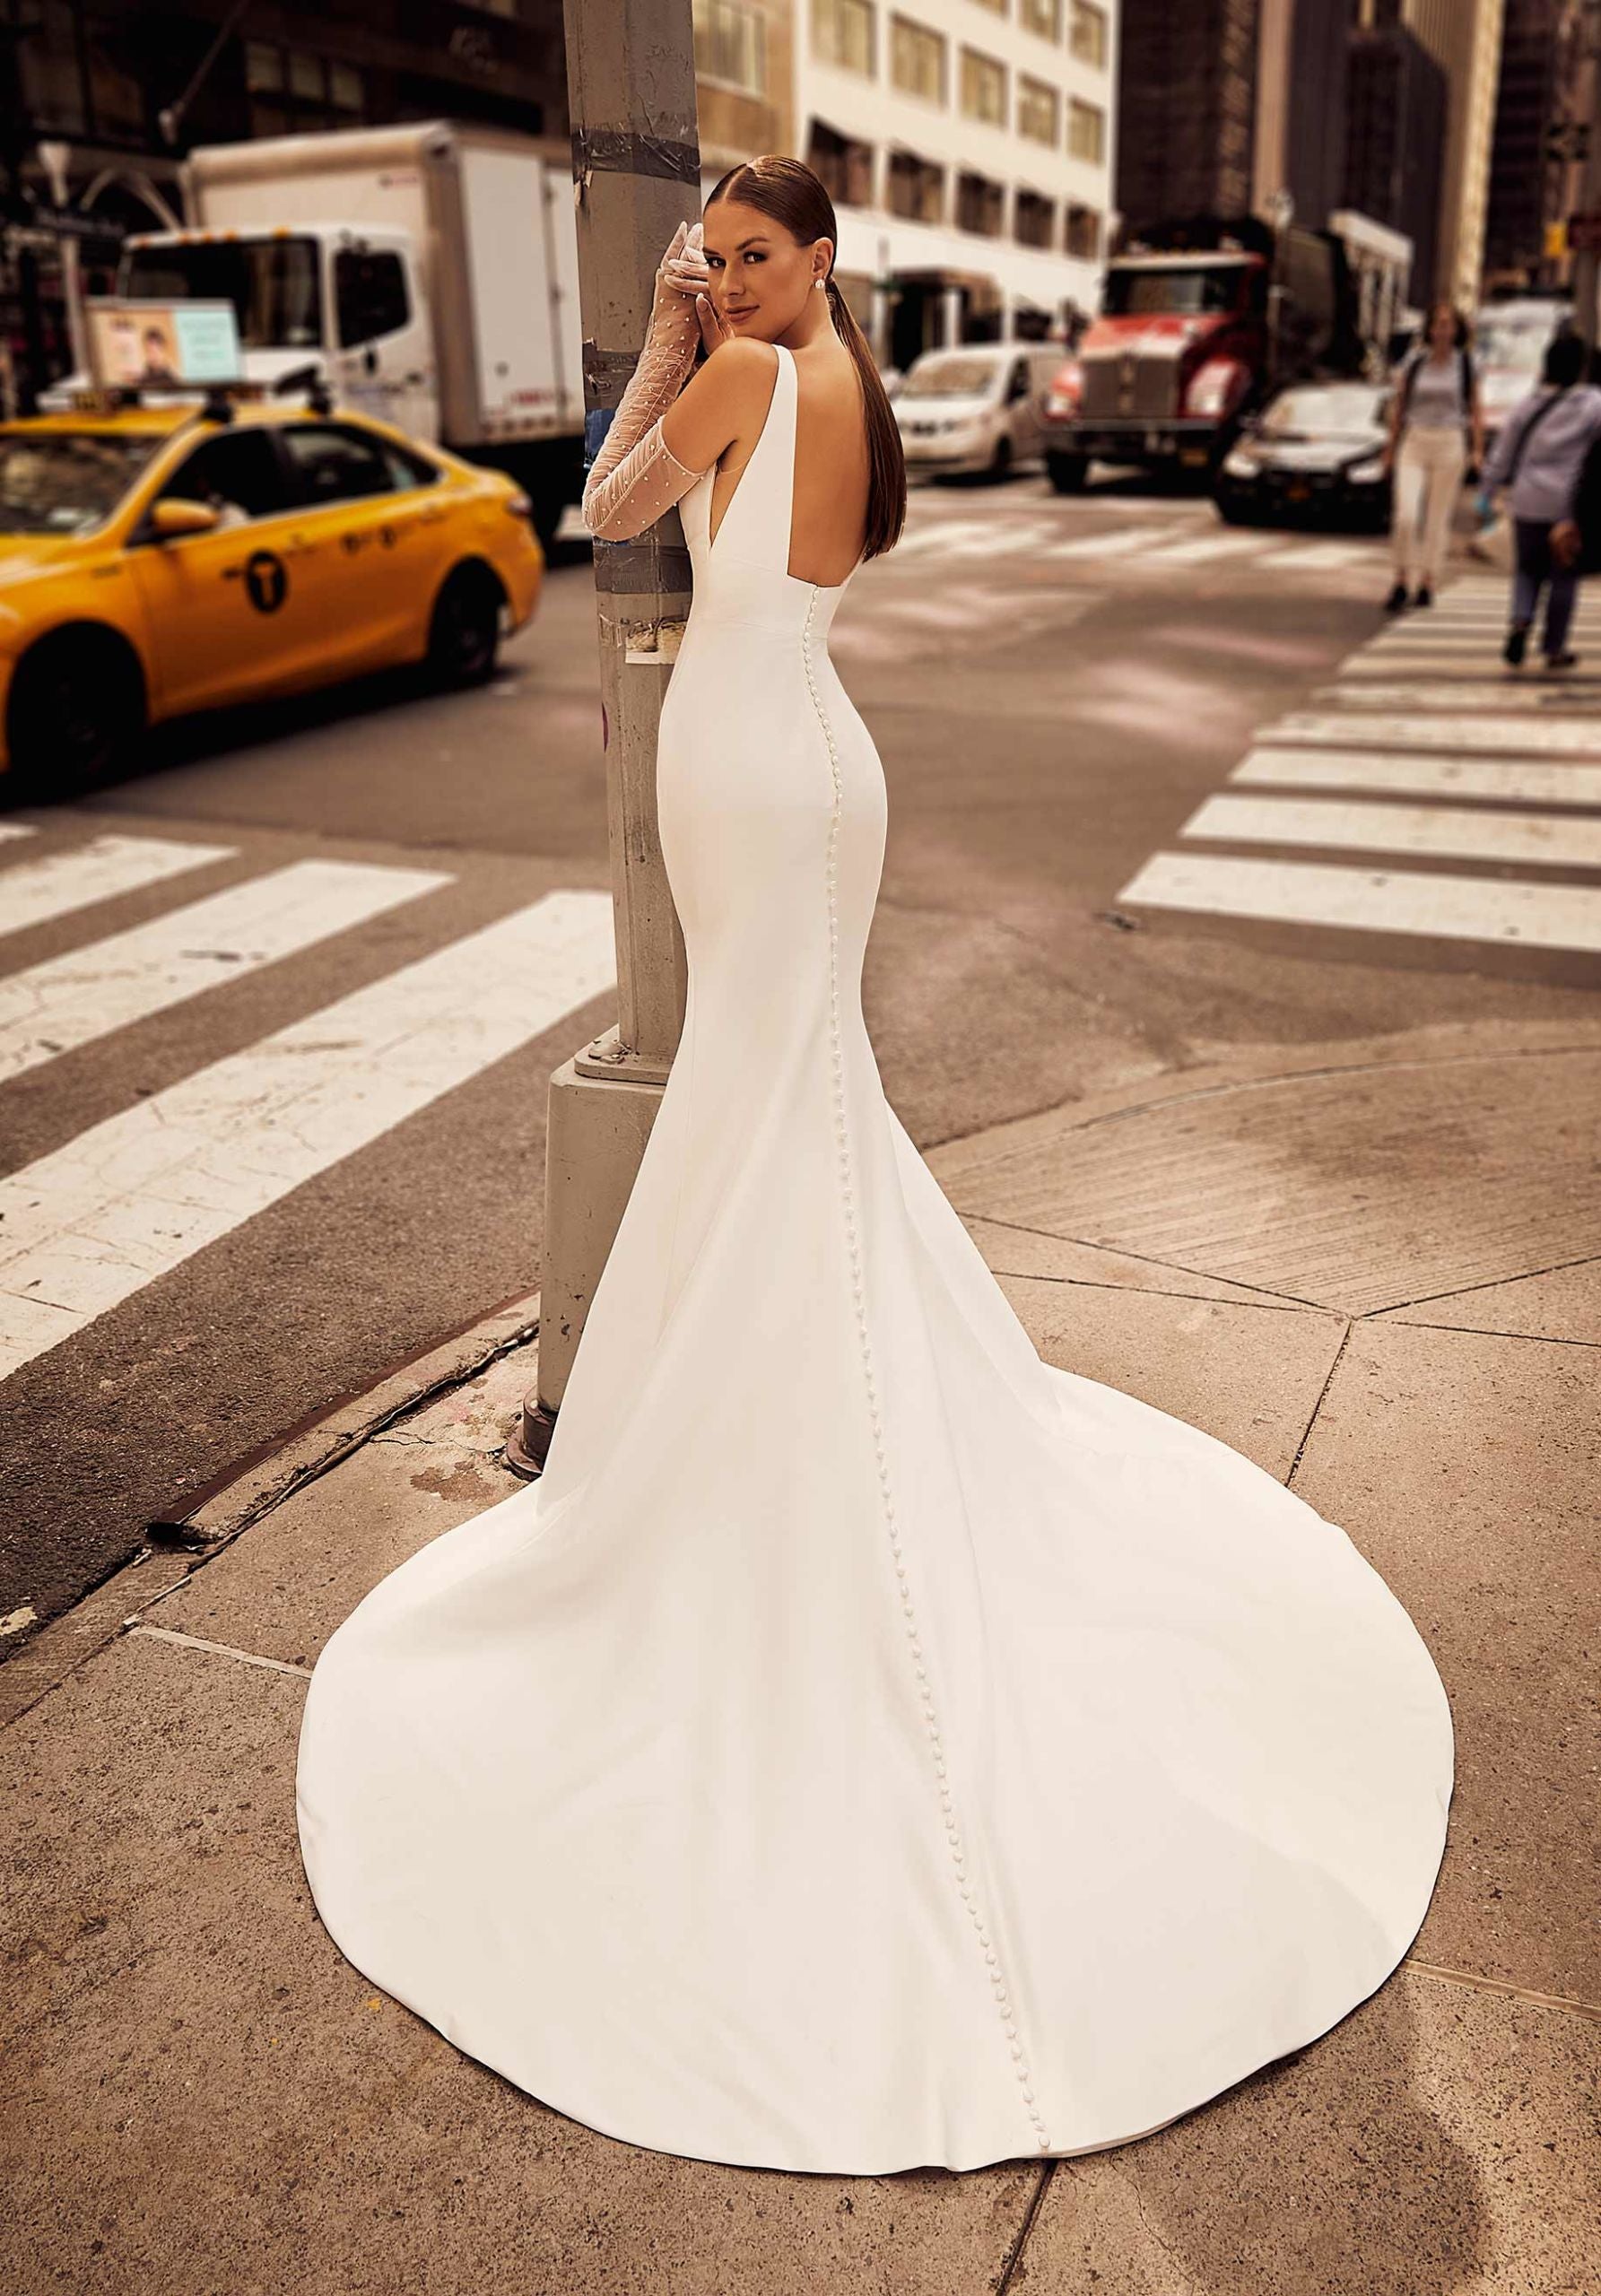 Onyx - classic wedding dress with plunging neckline, wide waist band and square back